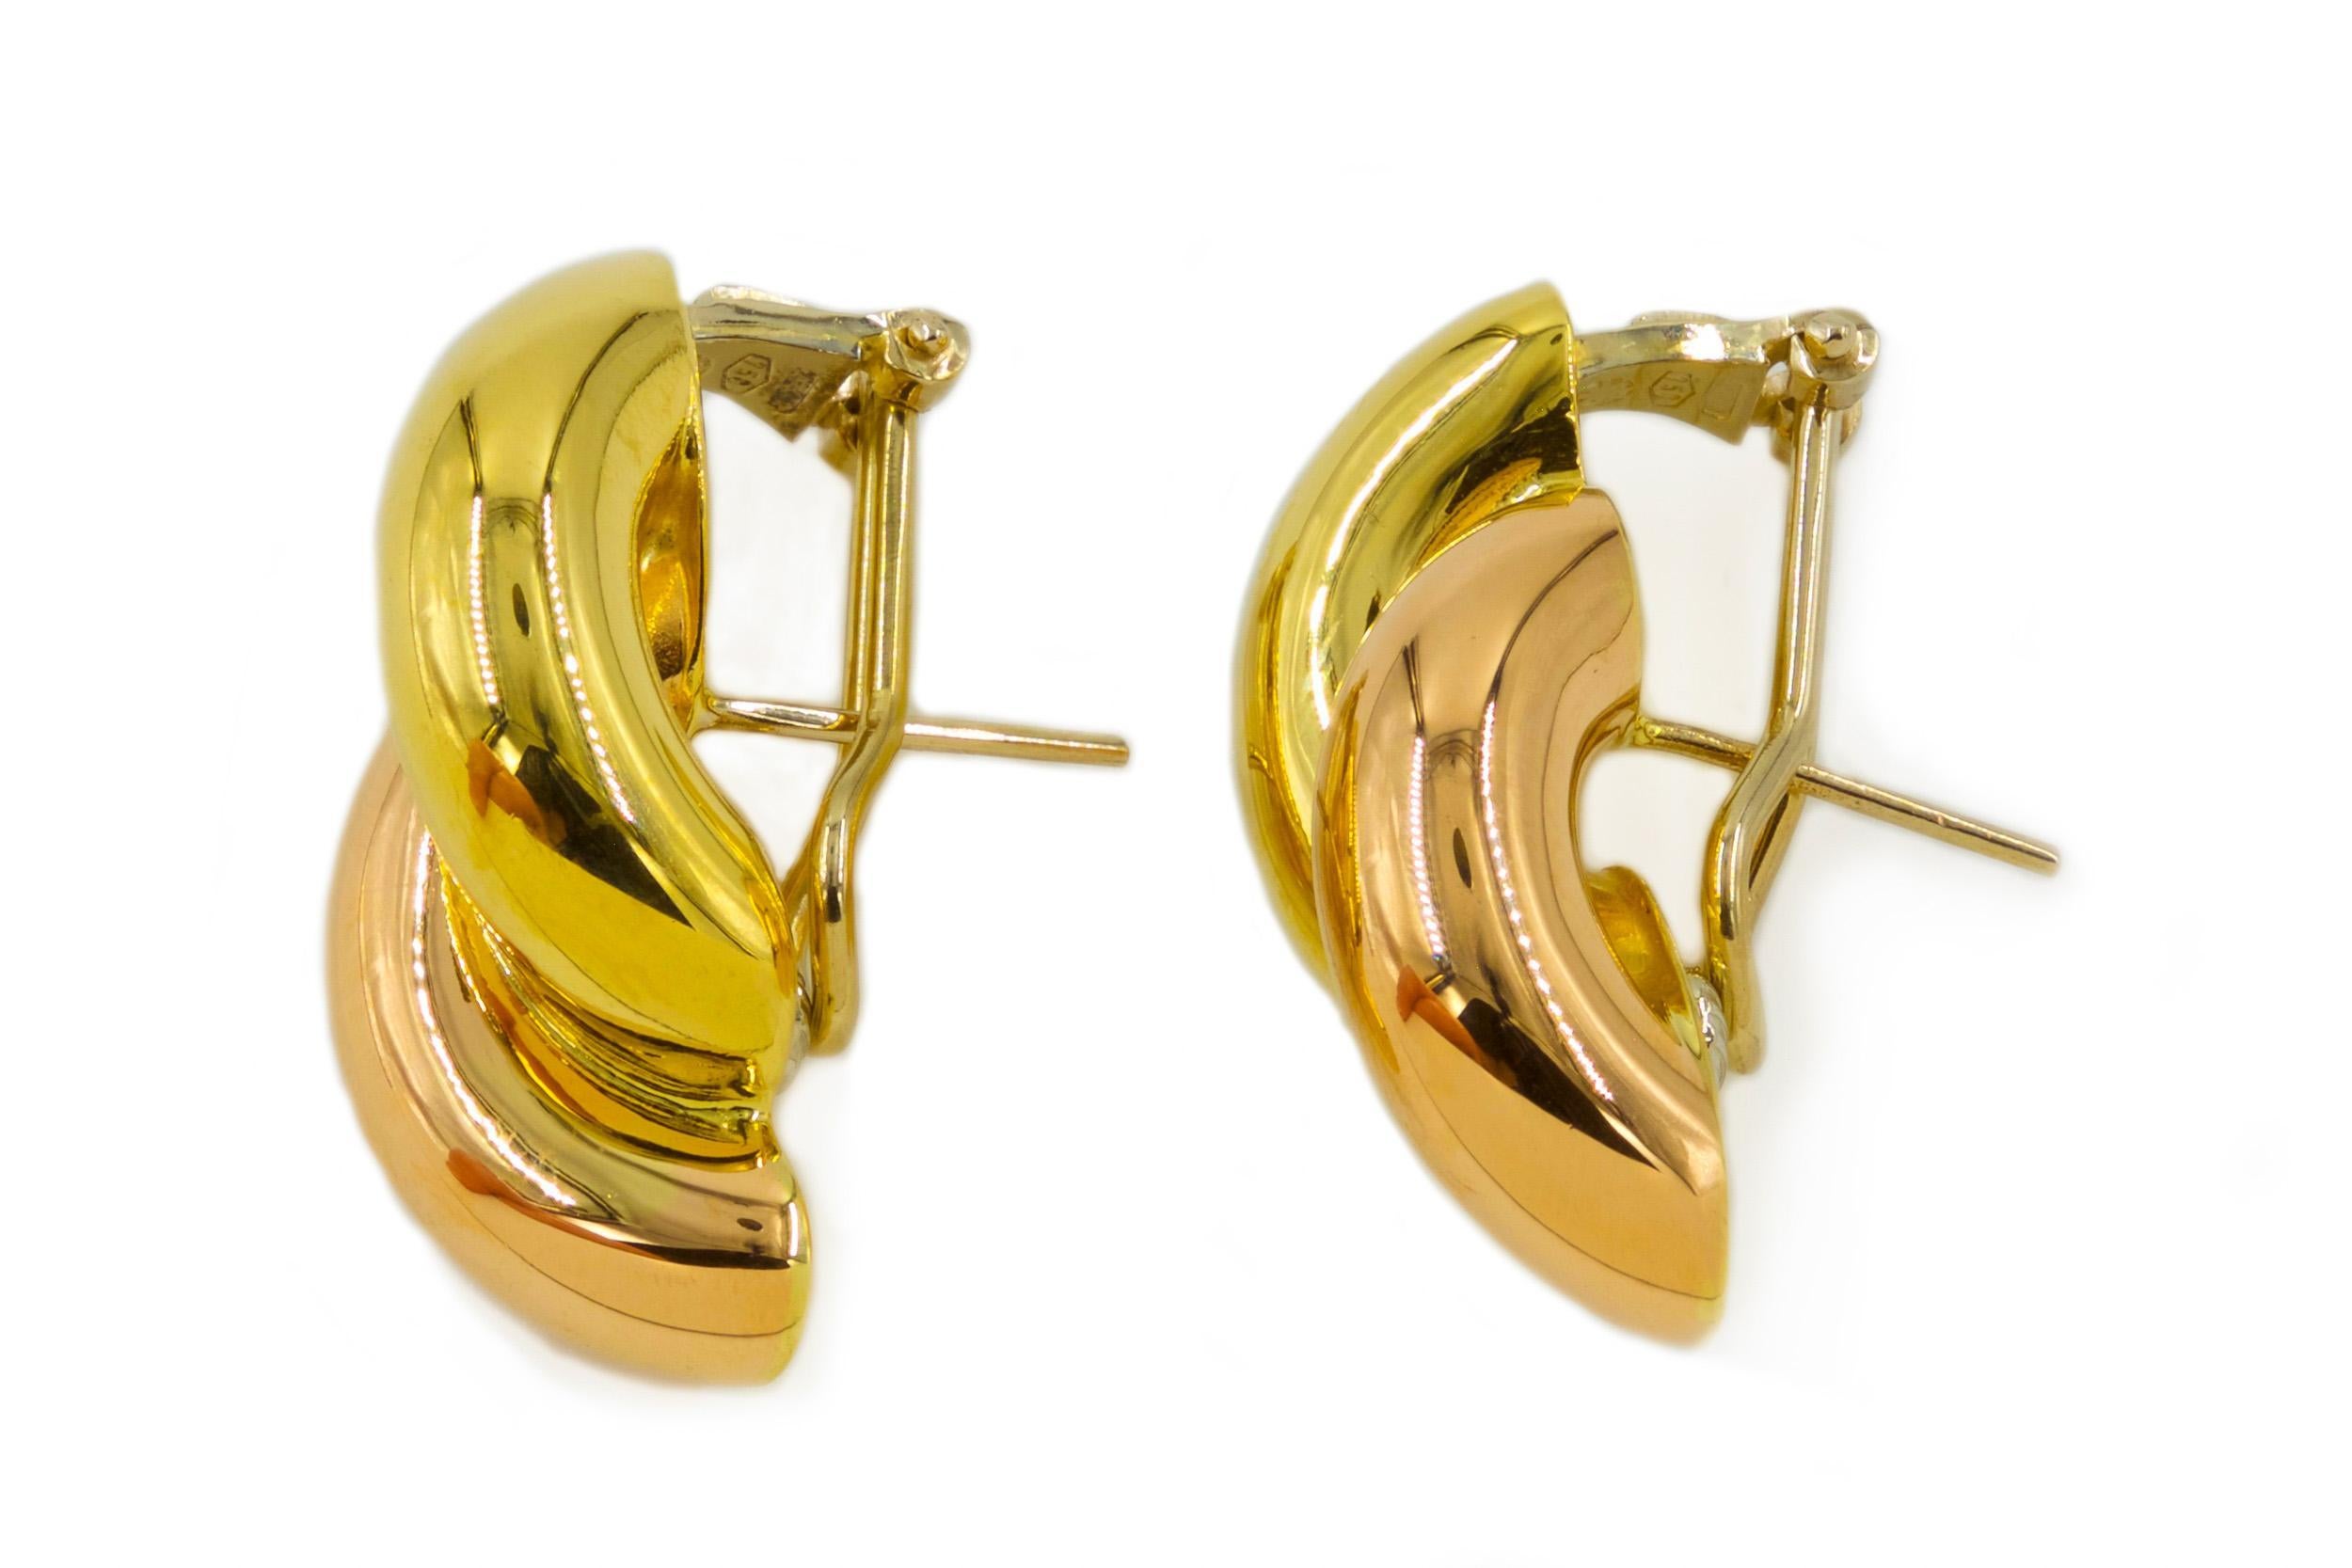 Pair of Pink and Yellow 18k Gold Half-Tube Earrings by Nicolis Cola For Sale 1